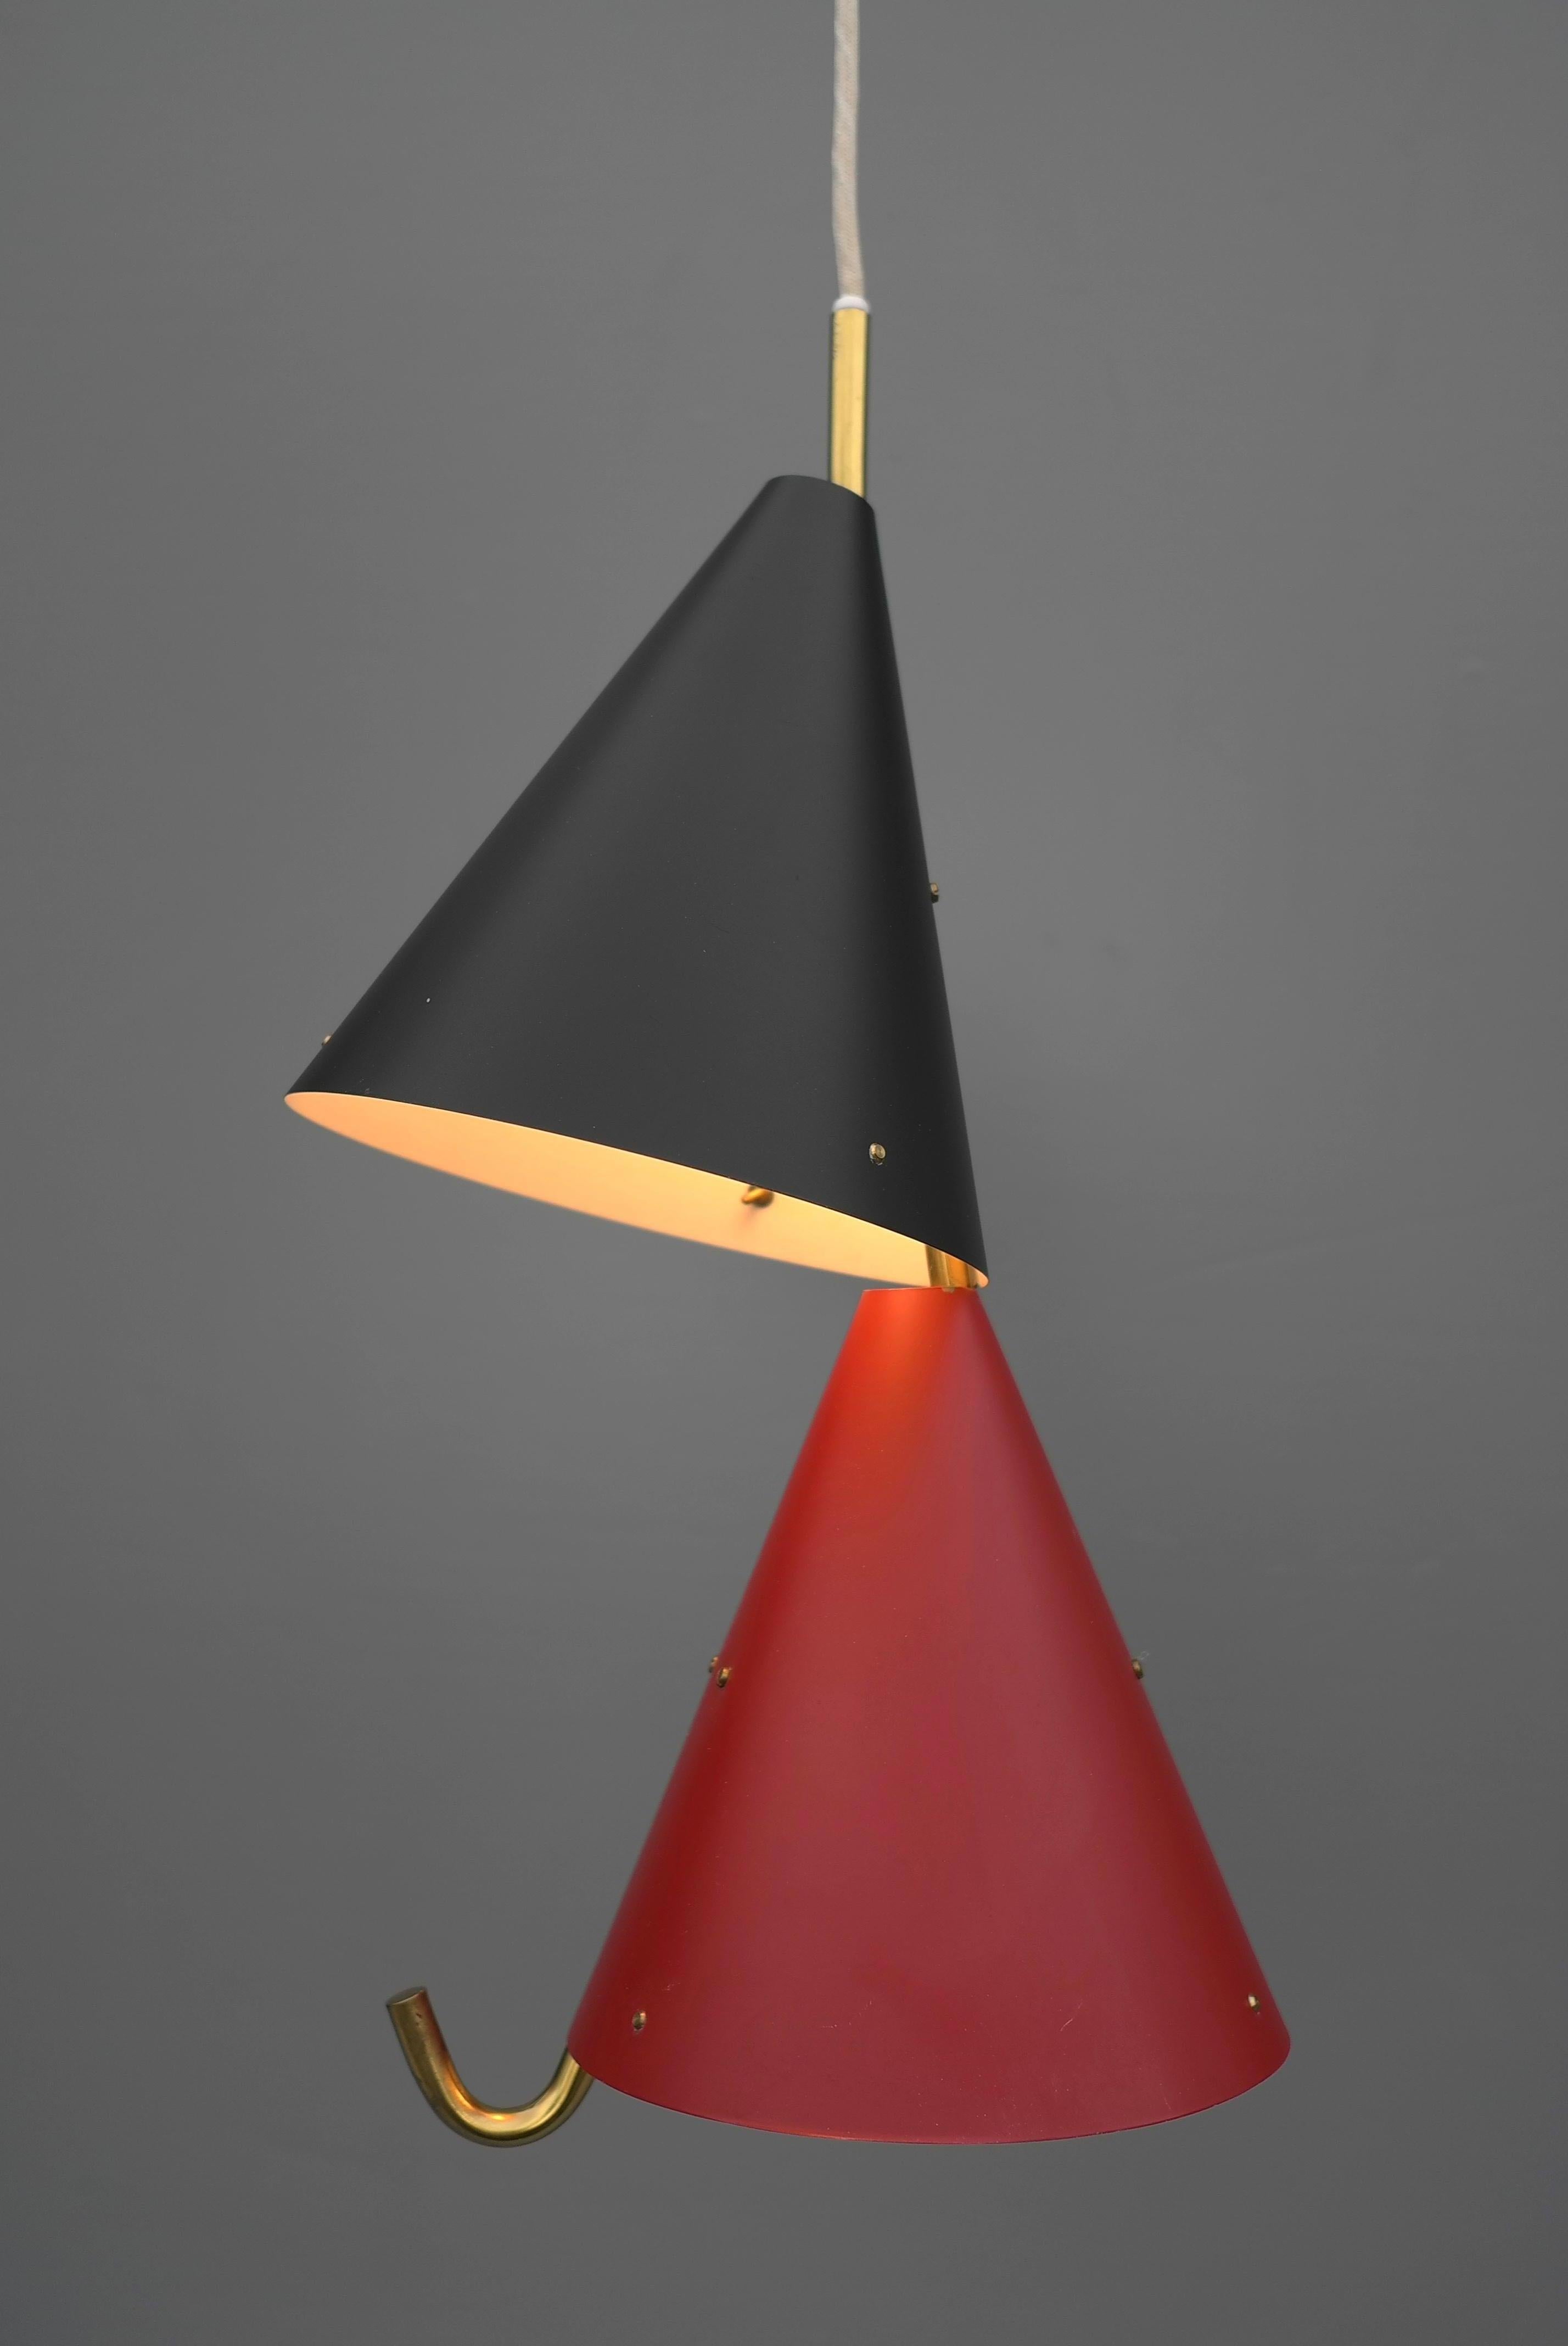 Metal Bent Karlby Red and Black New Old Stock Lyfa Pendant Lamp, Denmark, 1955 For Sale